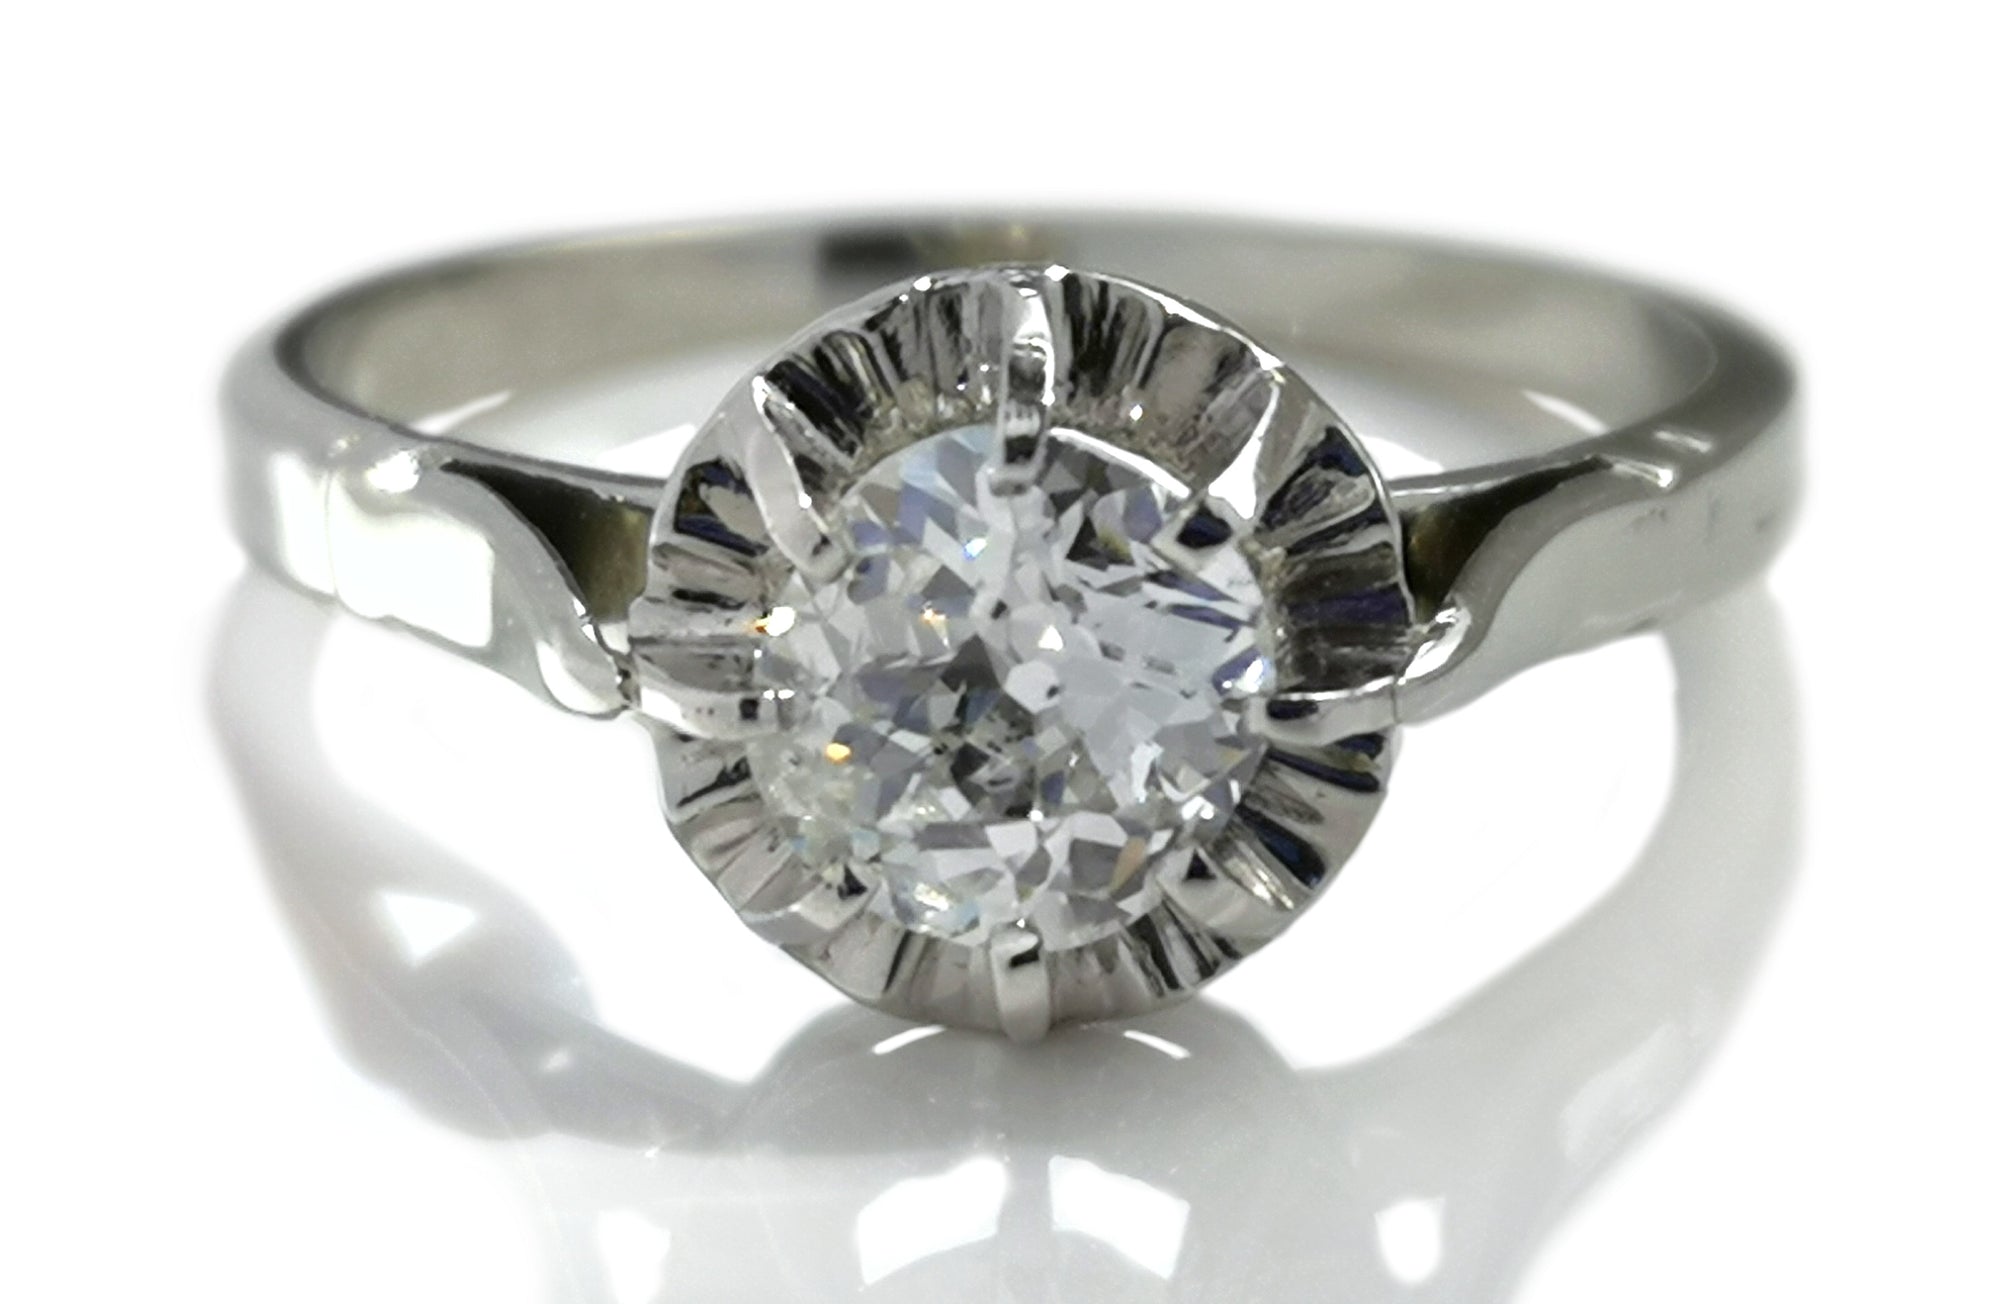 Antique French Ballerine 0.69ct G/SI1 Old Mine Cut Diamond Engagement Ring